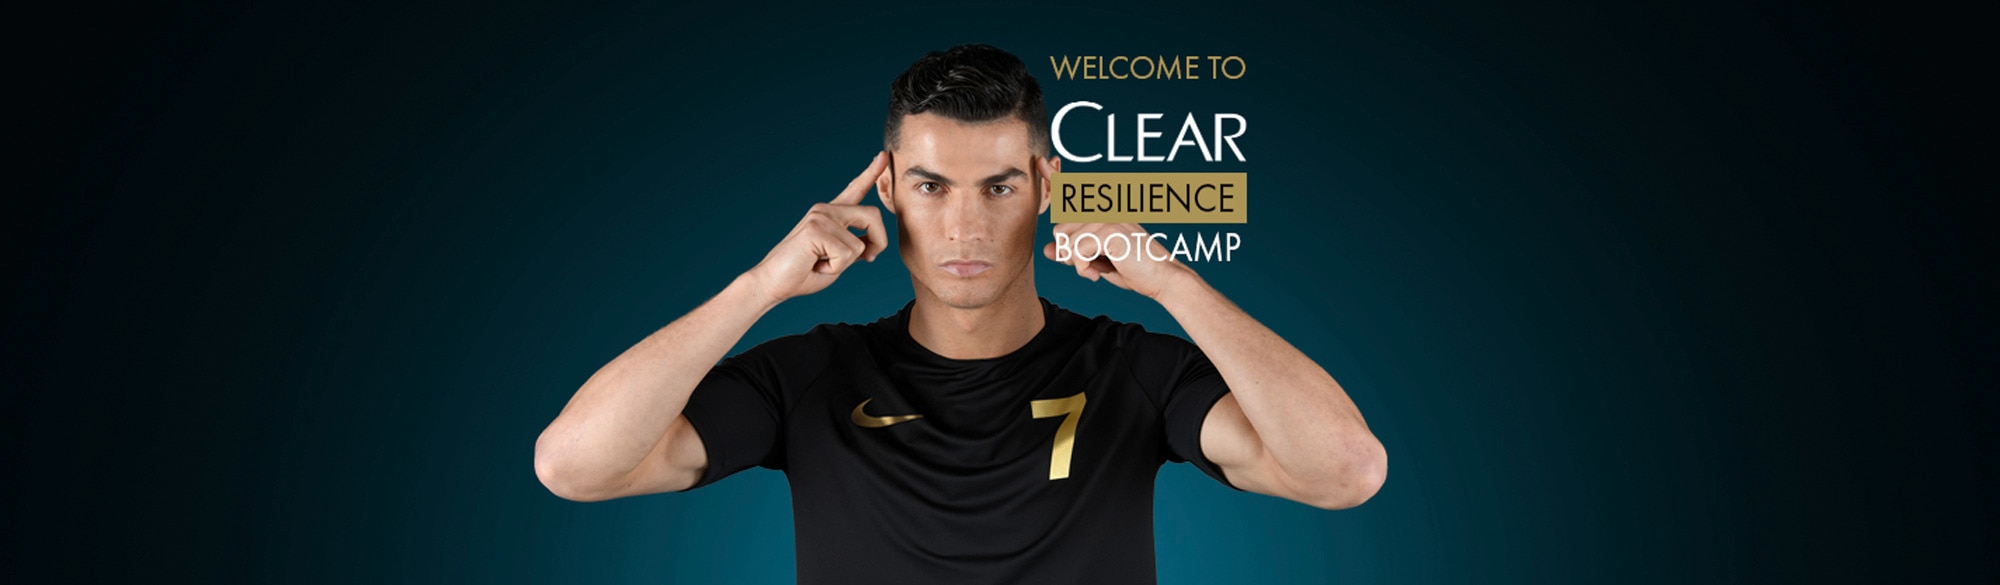 Storie di Resilienza | CLEAR Text